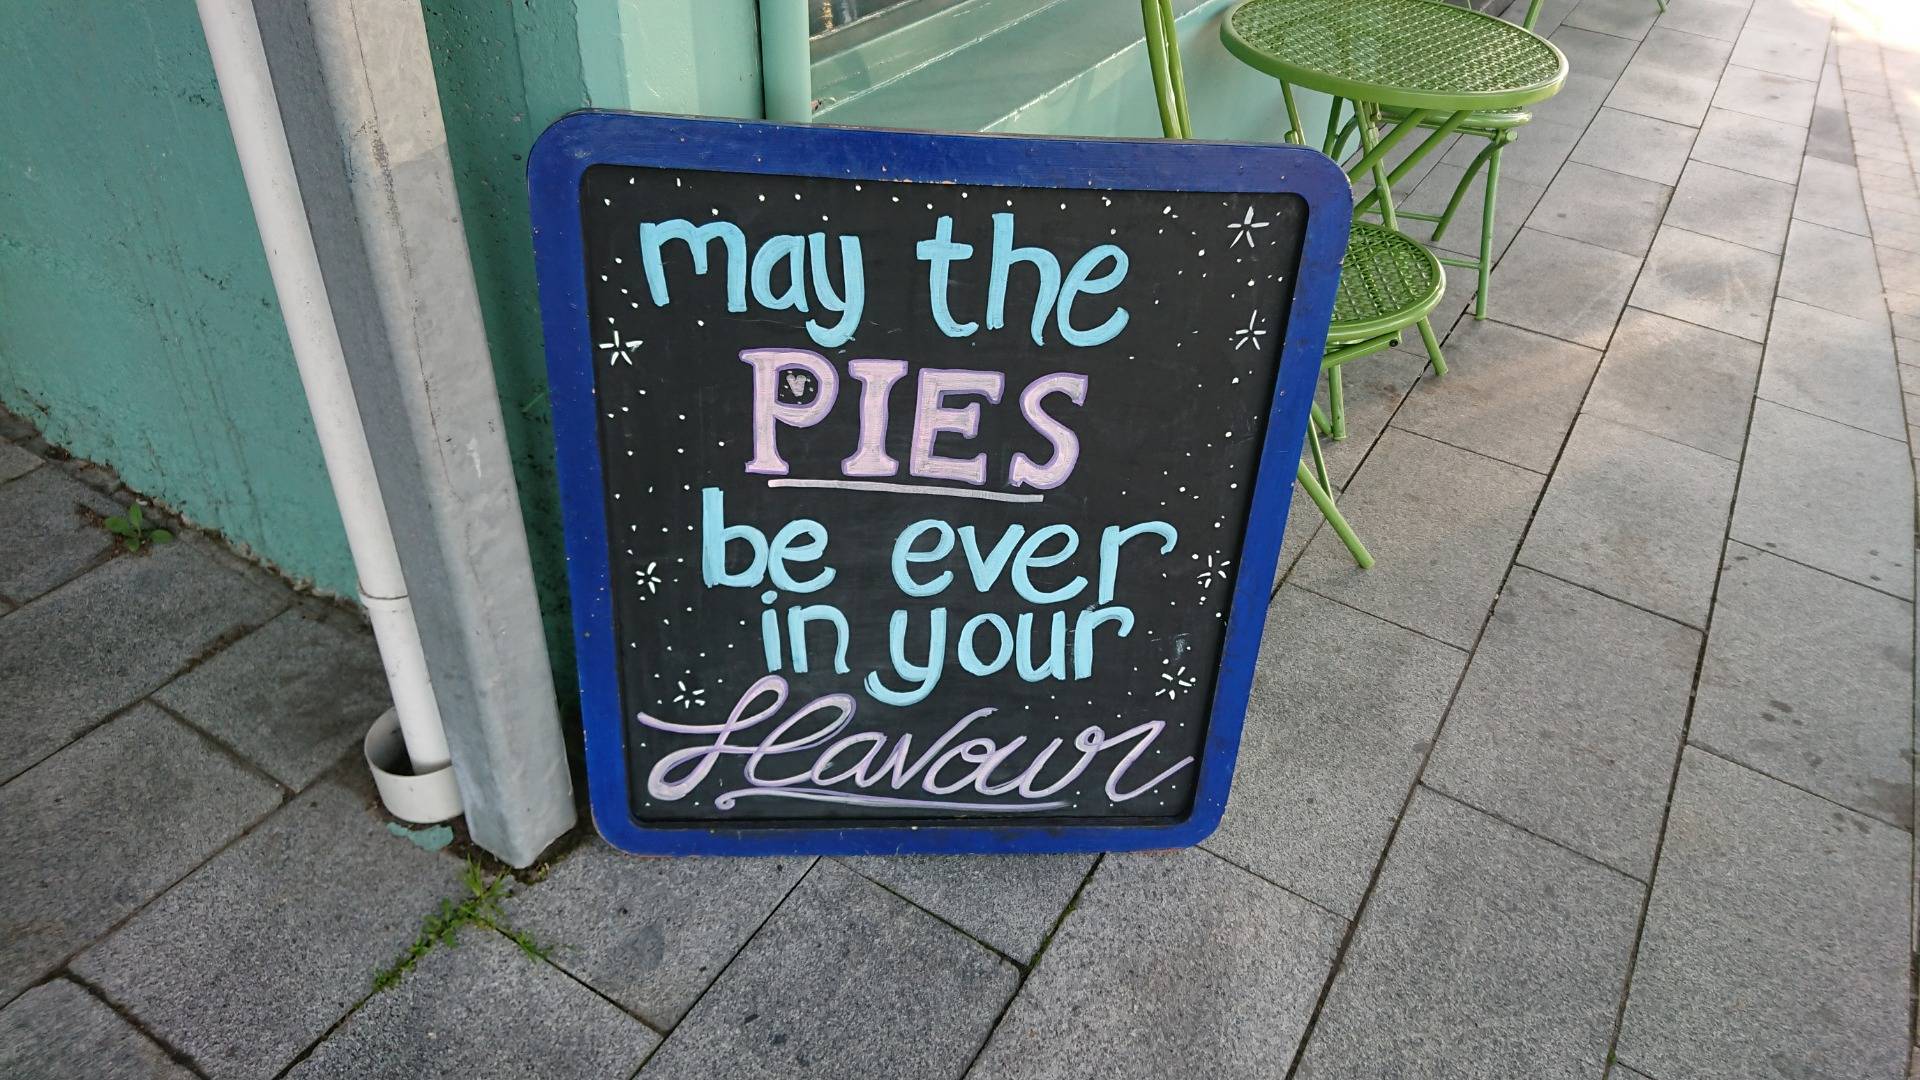 ...and can get some energy back with some pie!